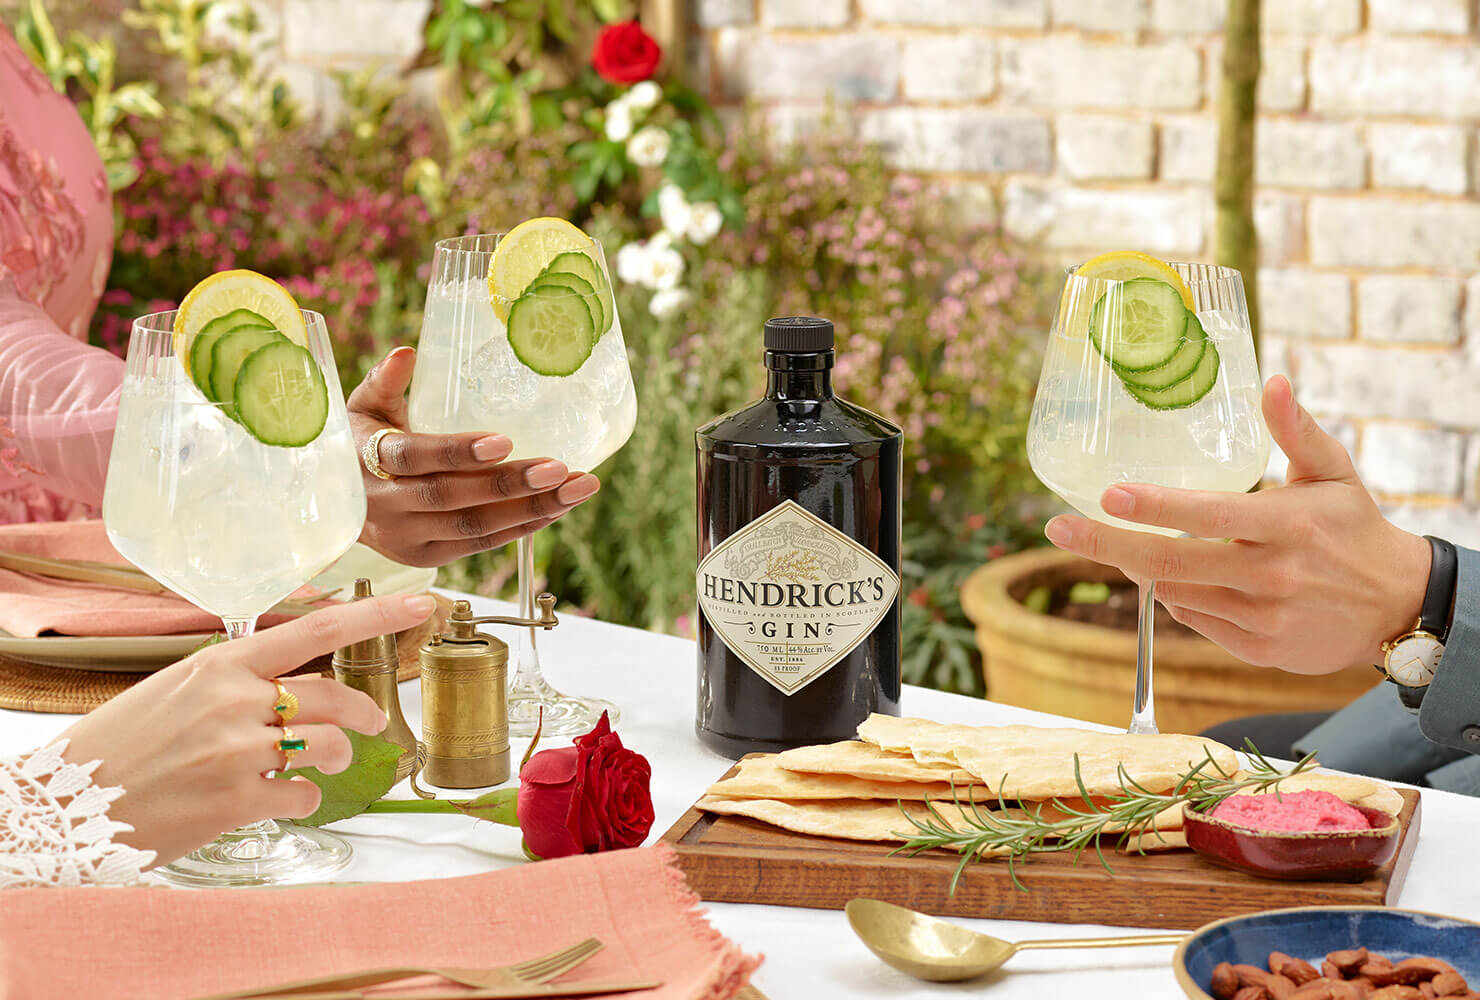 Hendrick's Gin Cucumber Lemonade cocktail people clinking glasses at a summer garden party